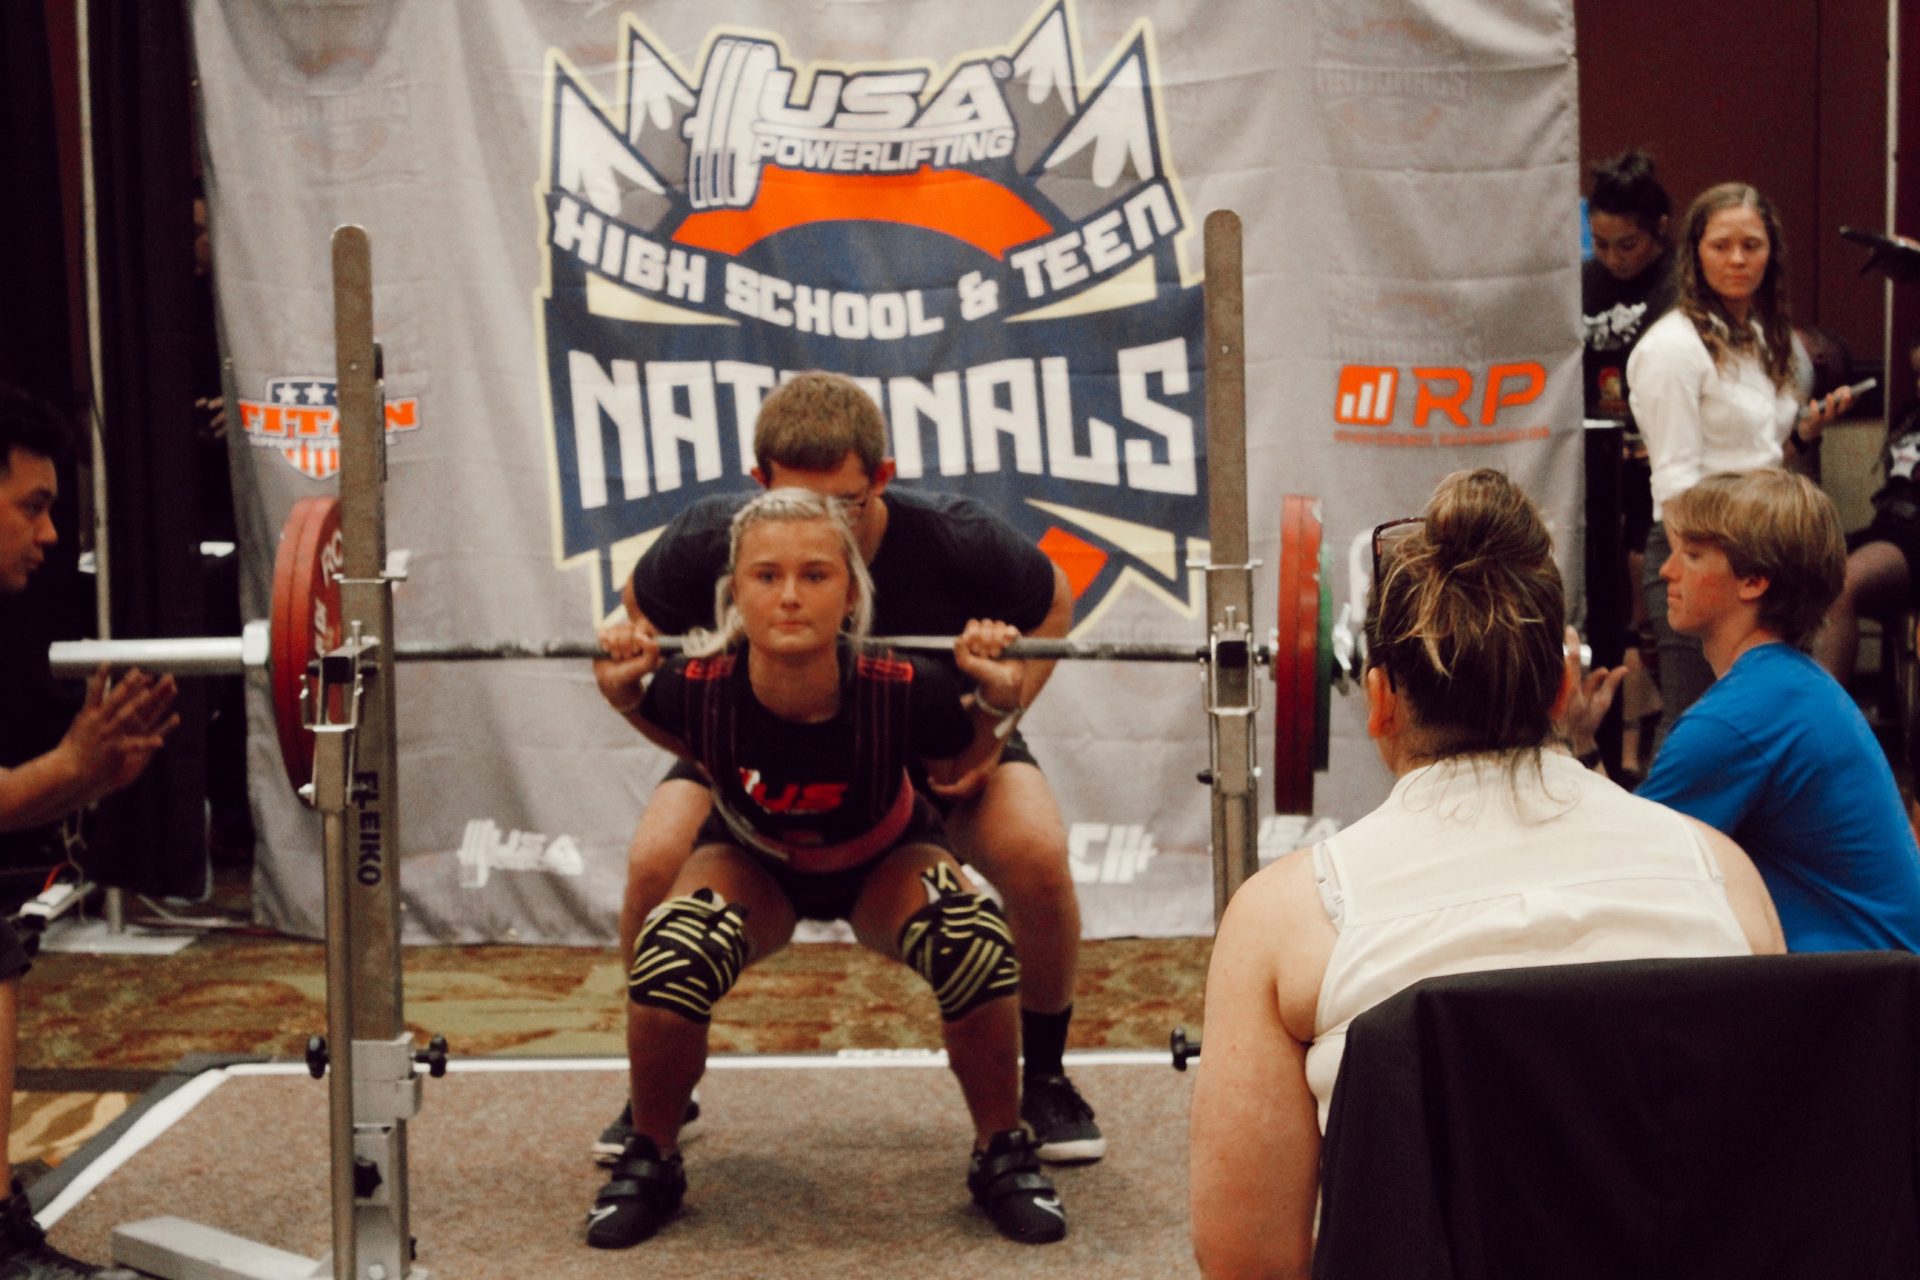 Two local athletes compete in High School National Powerlifting